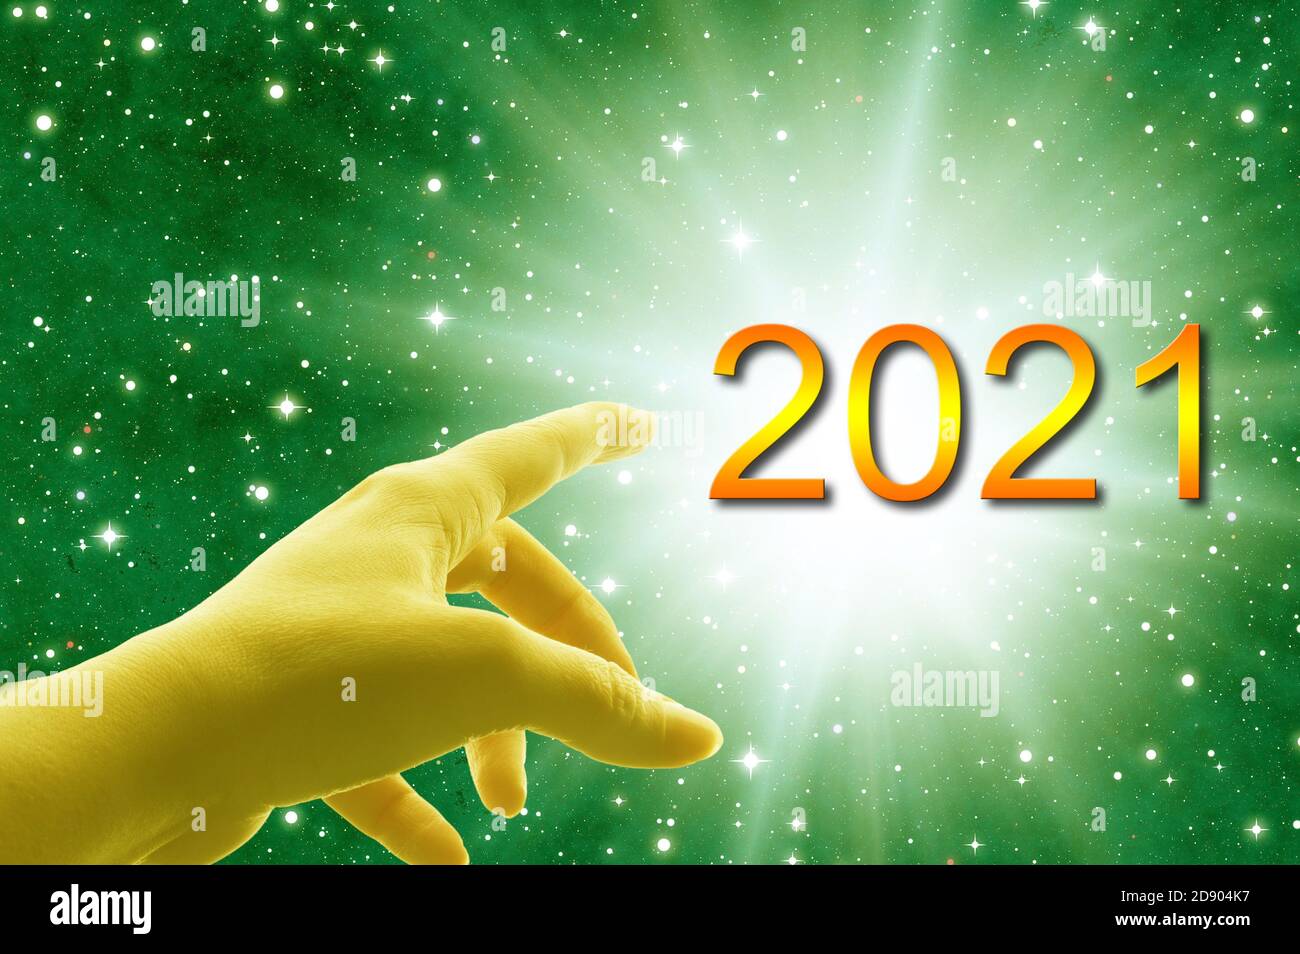 conceptual image for new year 2021 Stock Photo